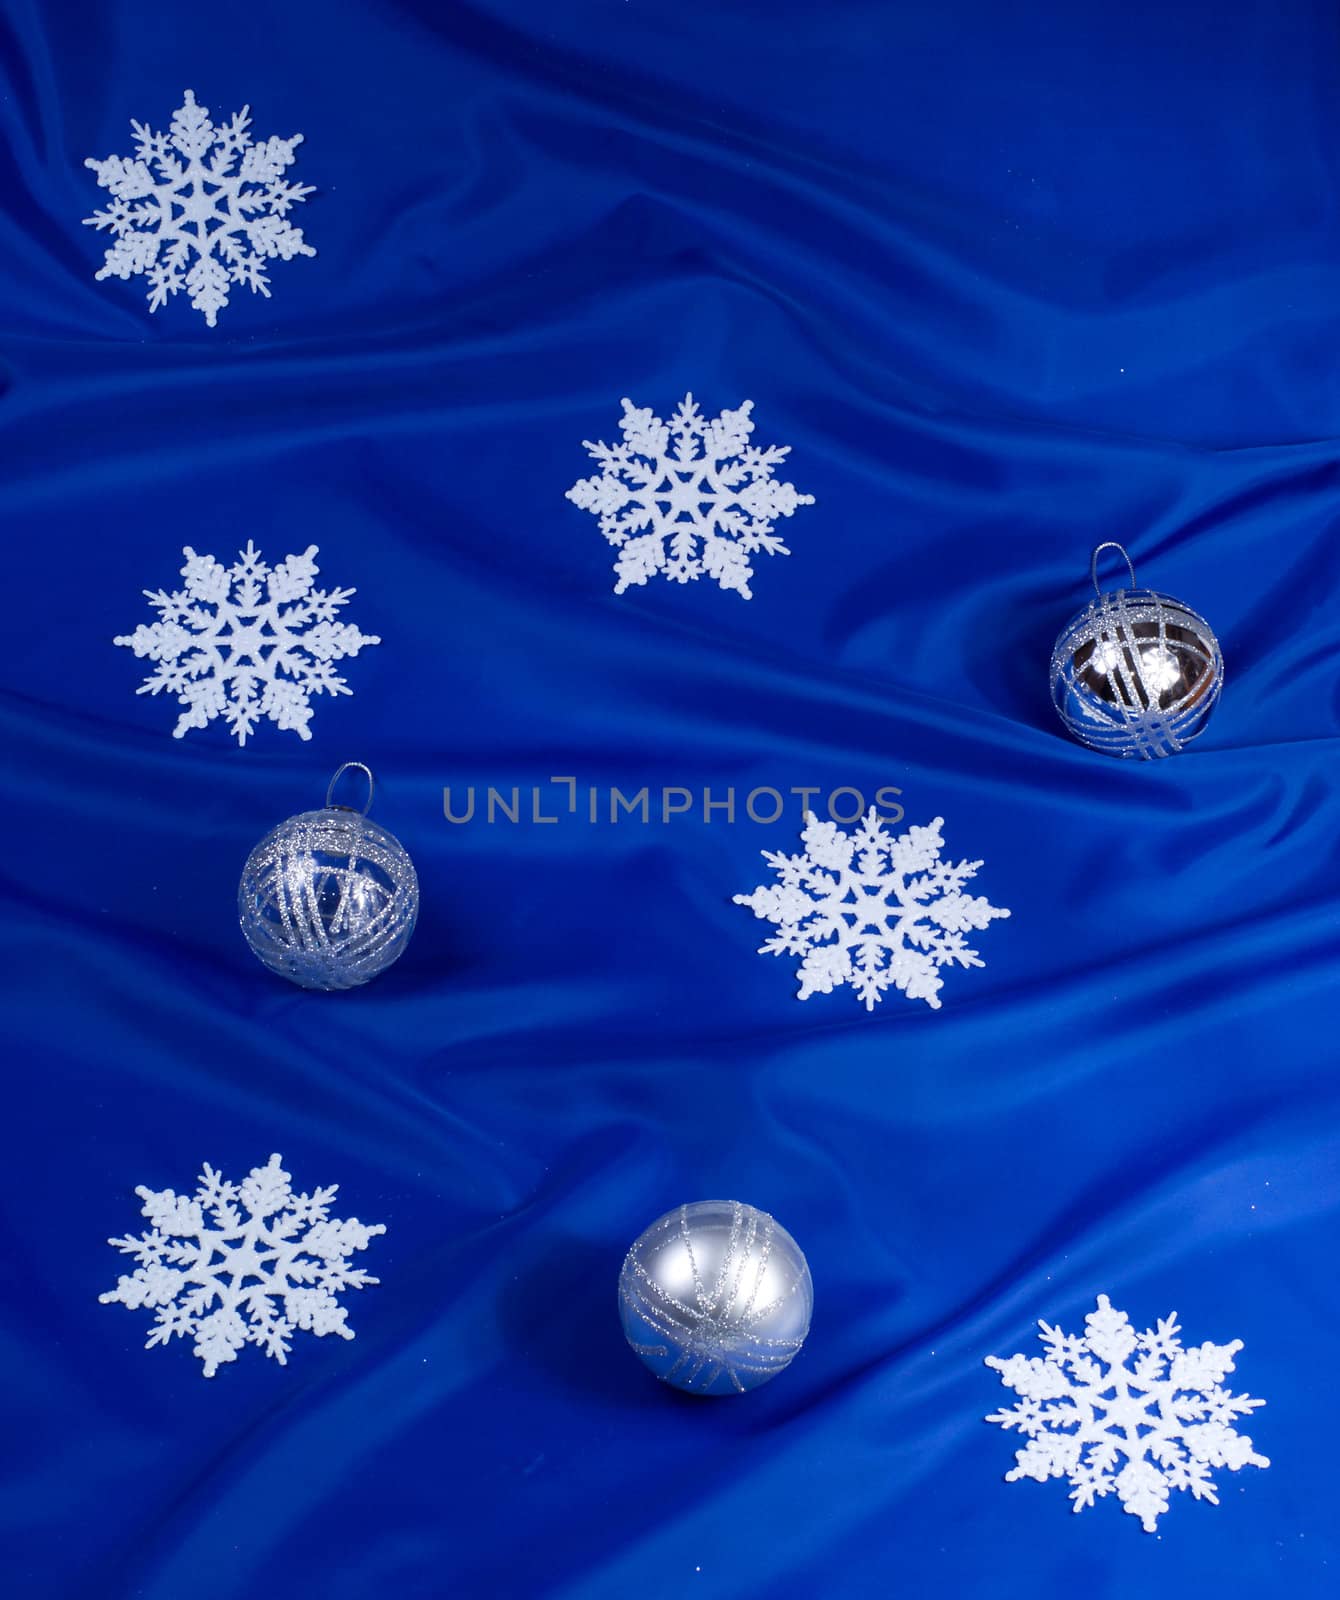 Snowflakes and spheres on a dark blue background